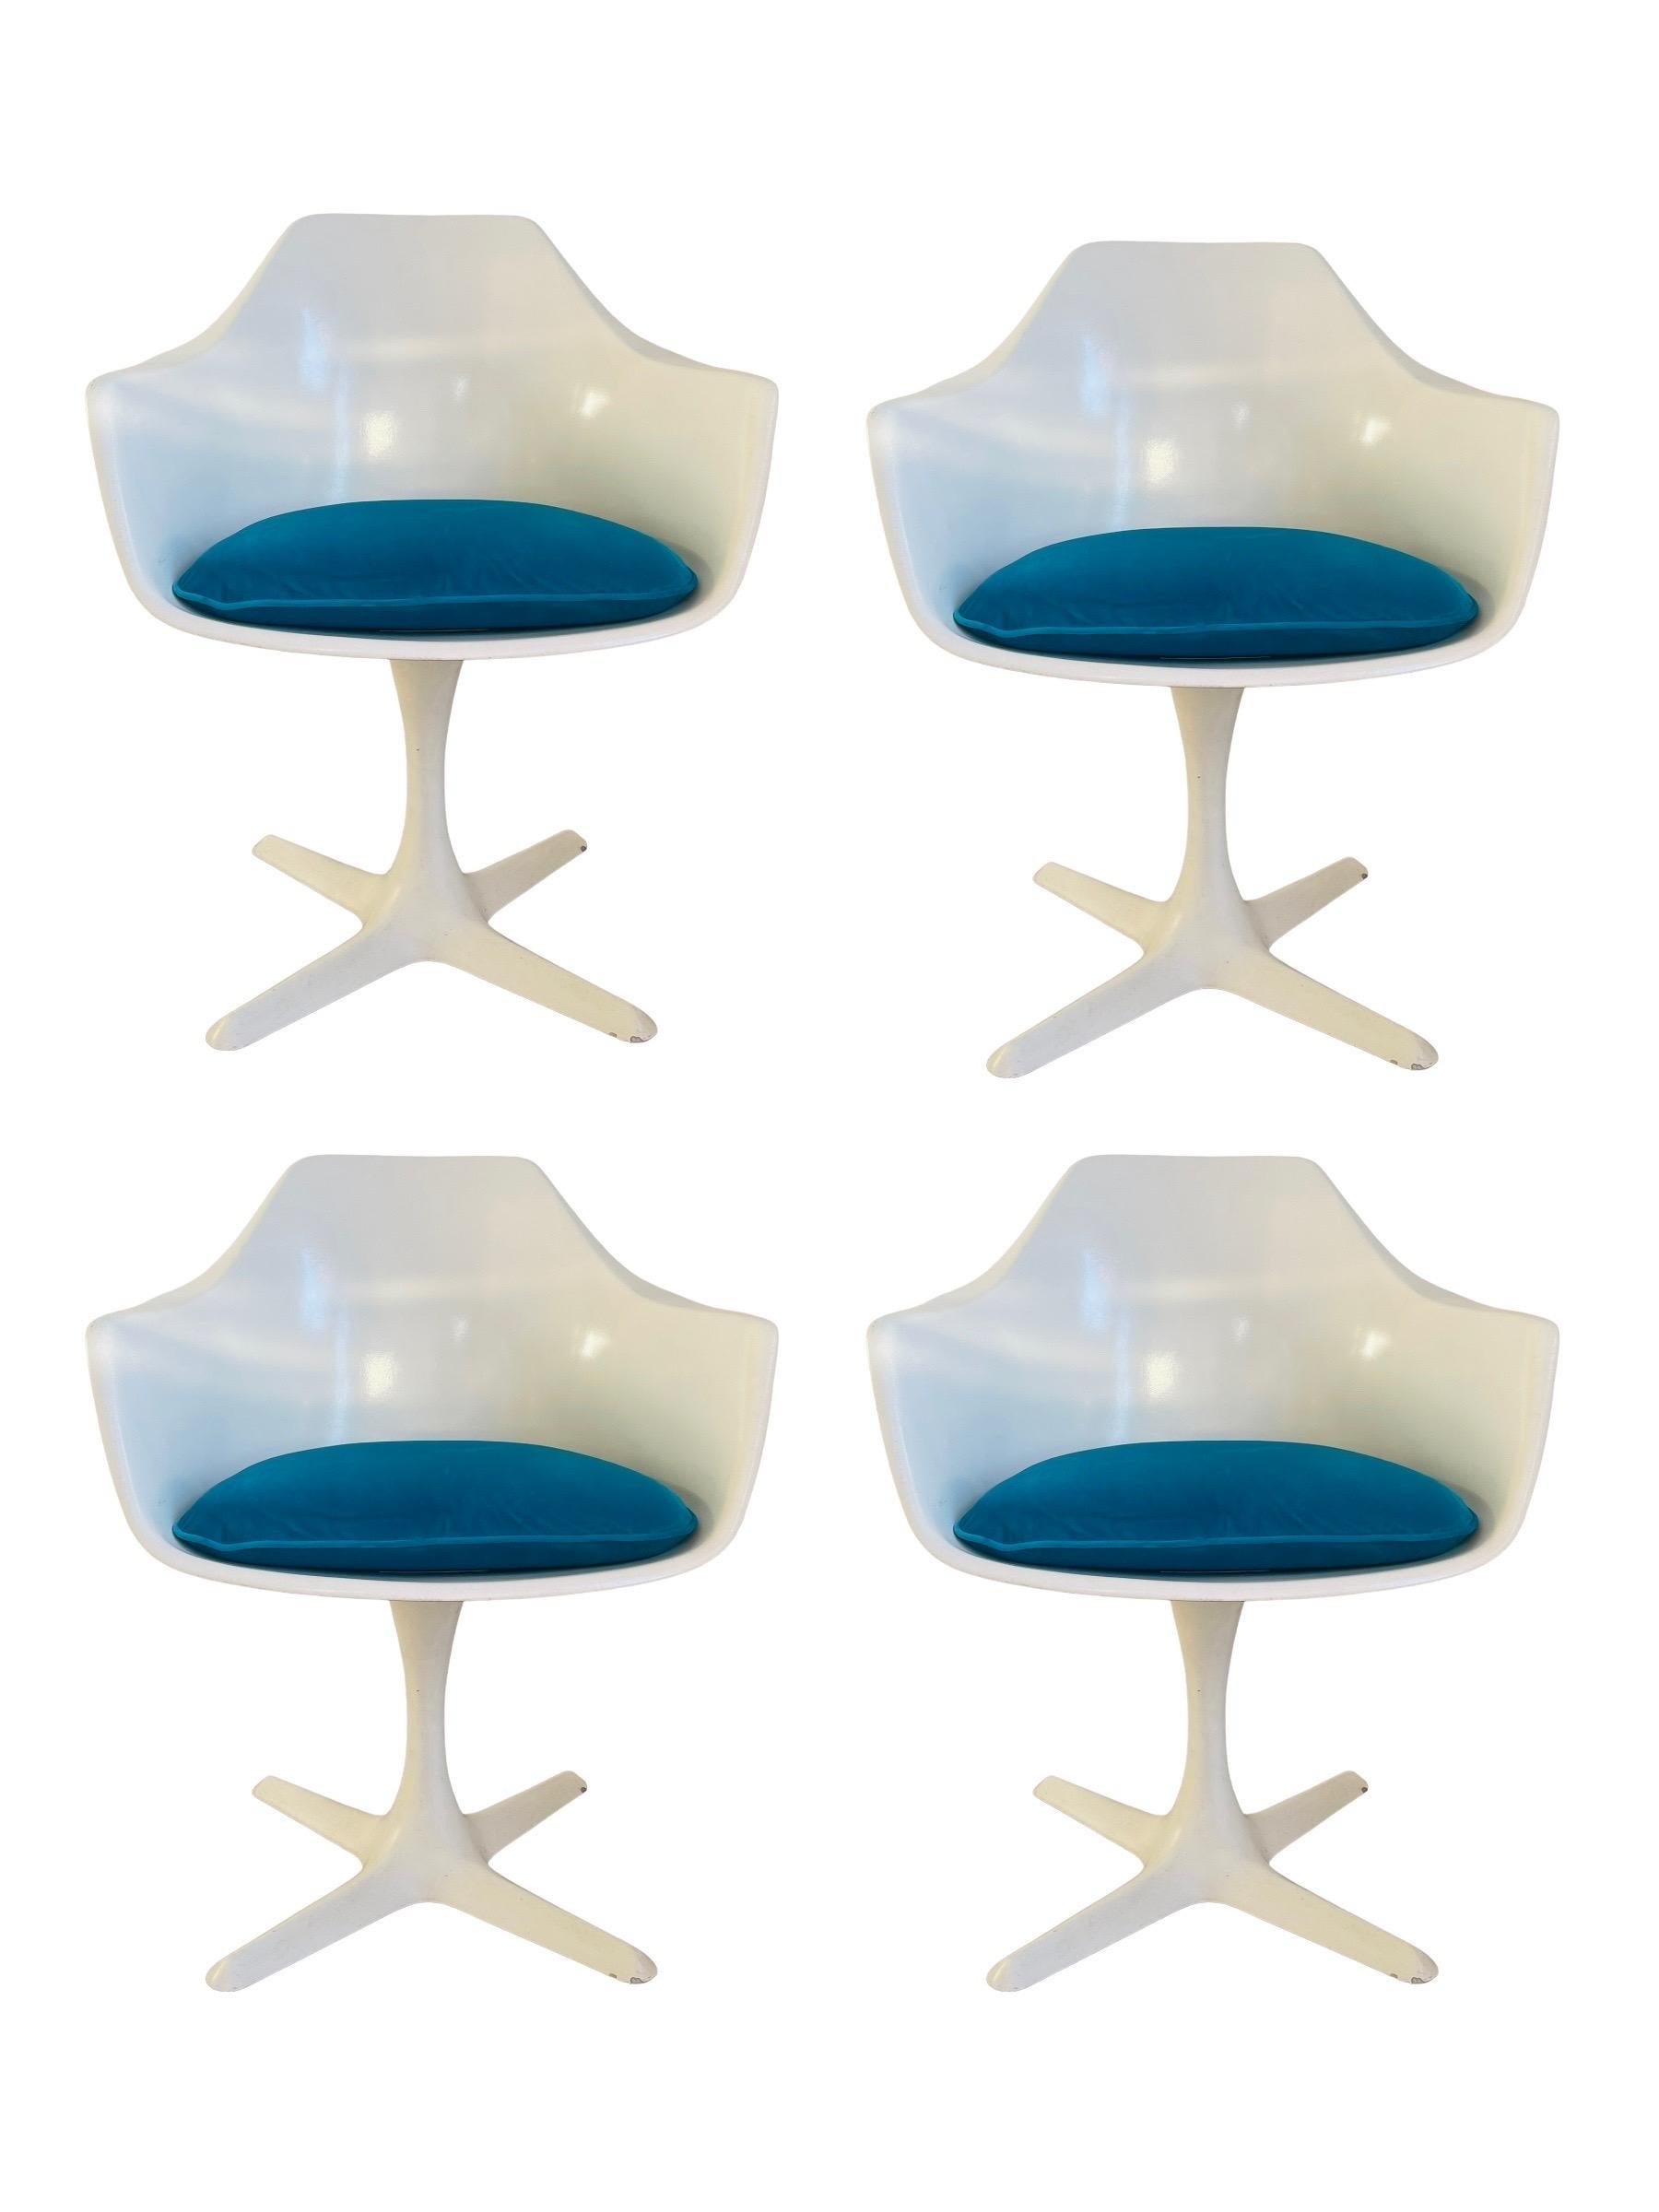 Mid-Century Modern tulip table and shell chair set in great condition. This set includes (1) Saarinen style tulip table and (4) propeller base shell armchairs by Burke. Chairs are molded fiberglass with new Turquoise Velvet upholstered seat cushions